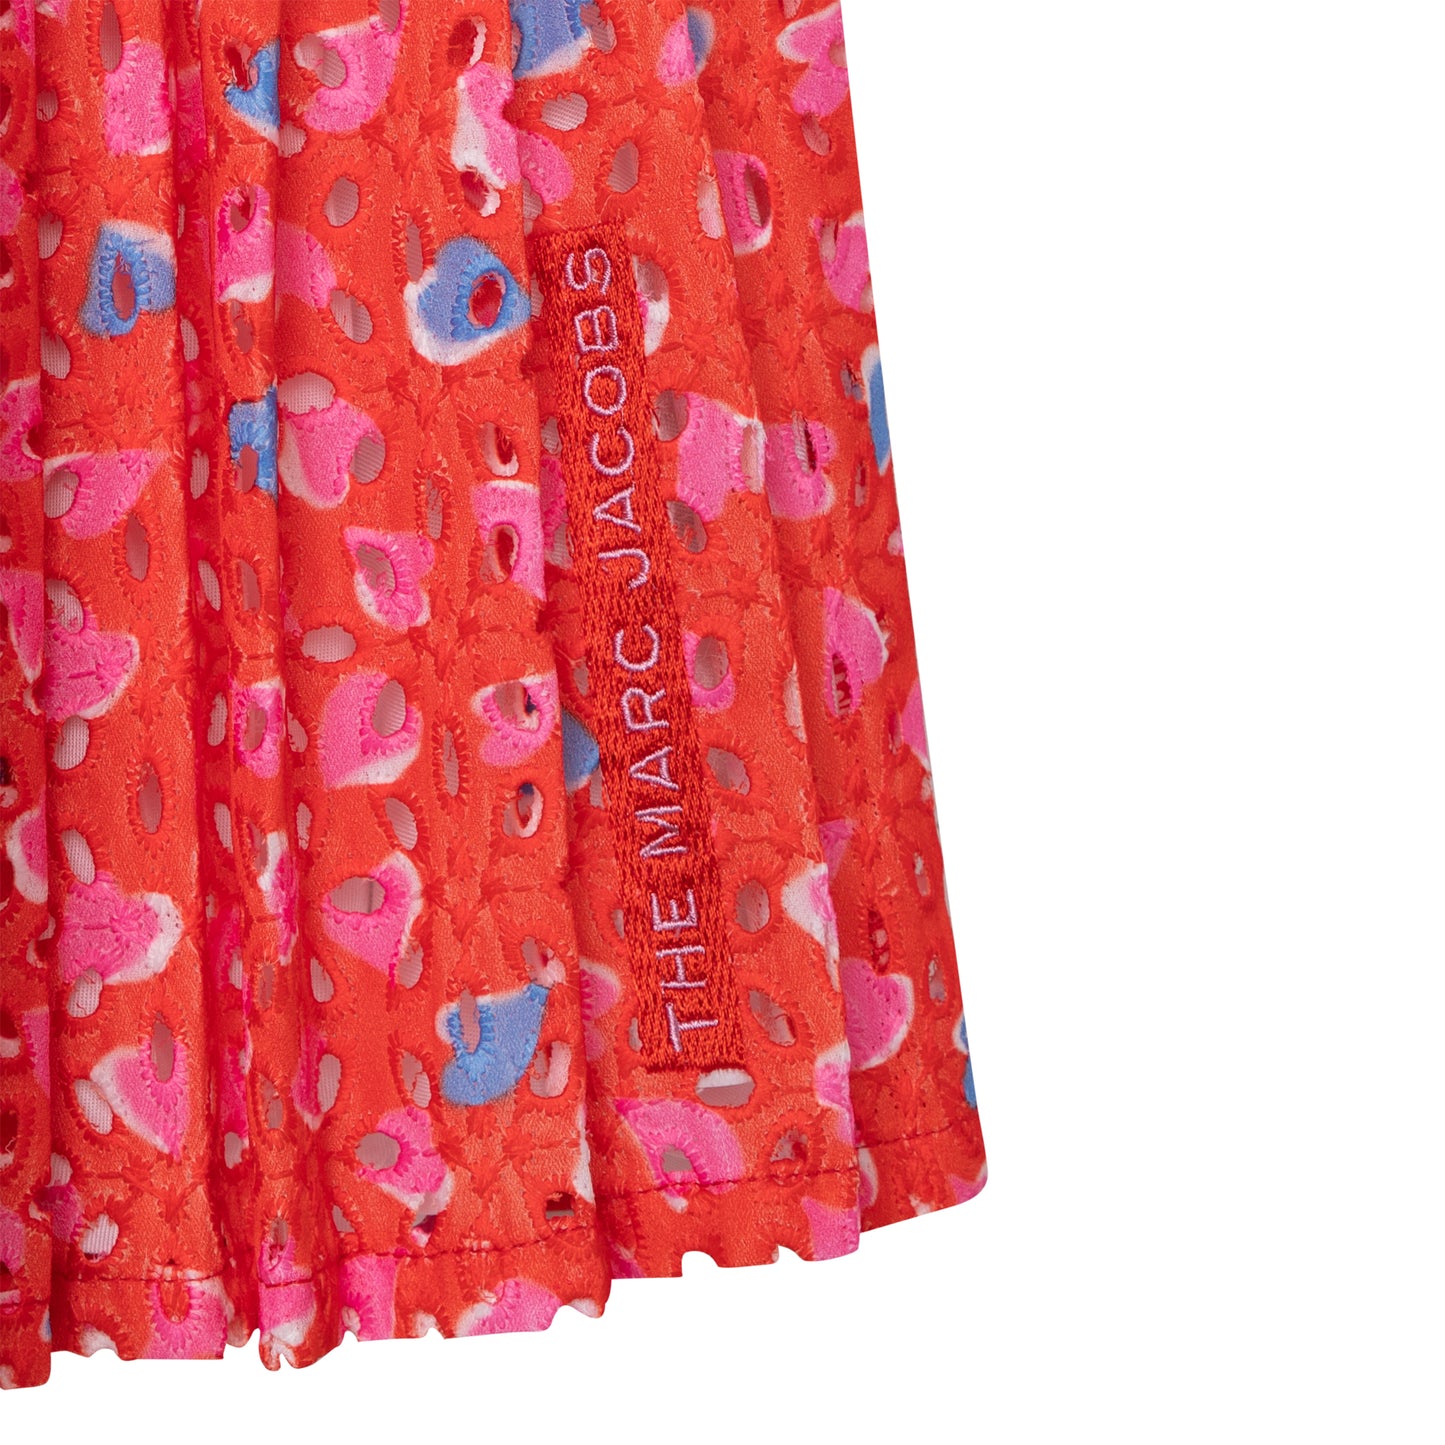 The Marc Jacobs Hearts Pleated Skirt